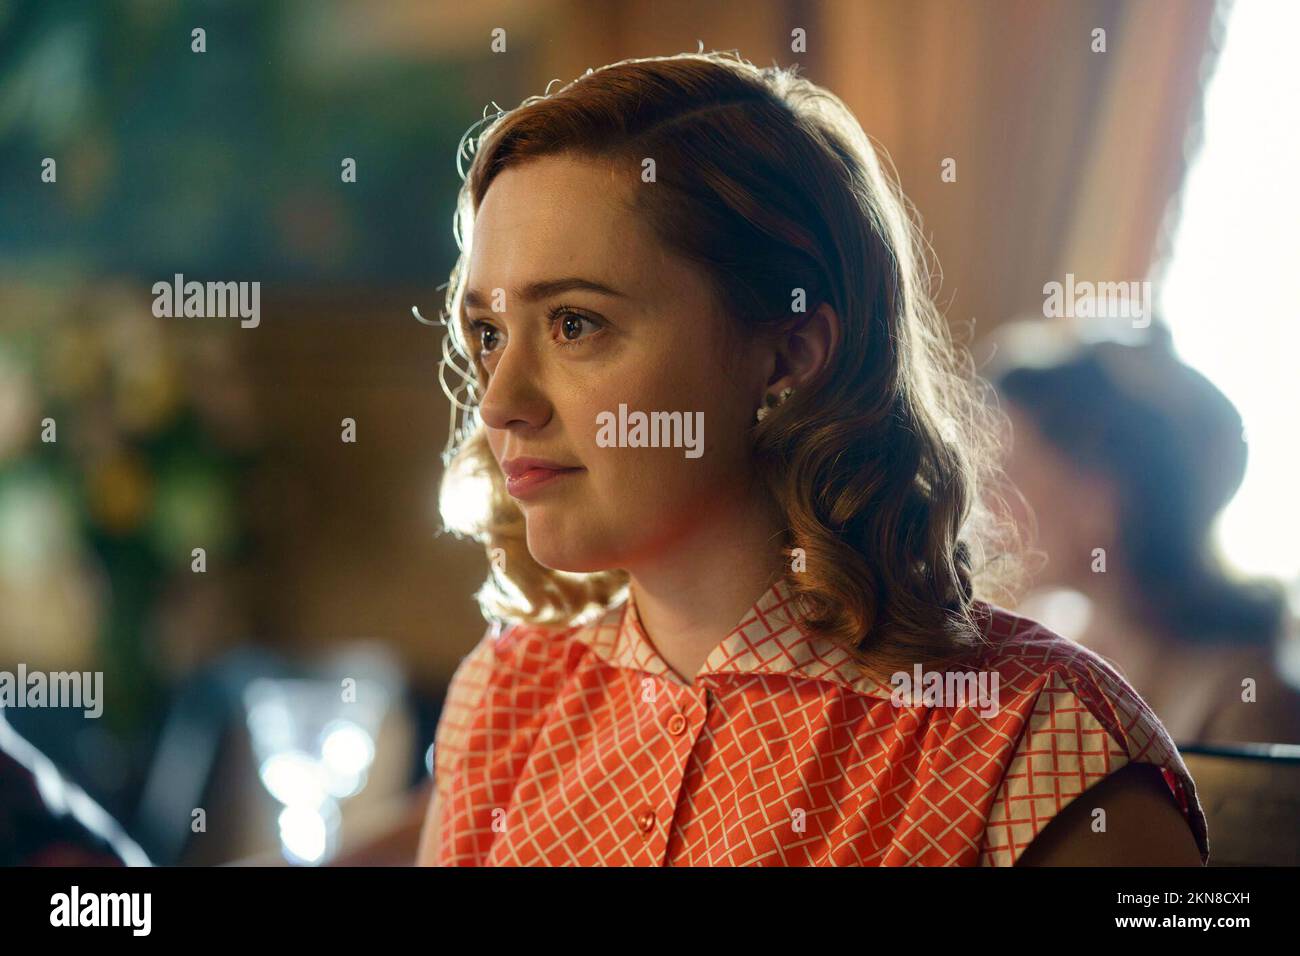 AIMEE LOU WOOD in LIVING (2022), directed by OLIVER HERMANUS. Credit: Ingenious / Film4 Productions / Album Stock Photo